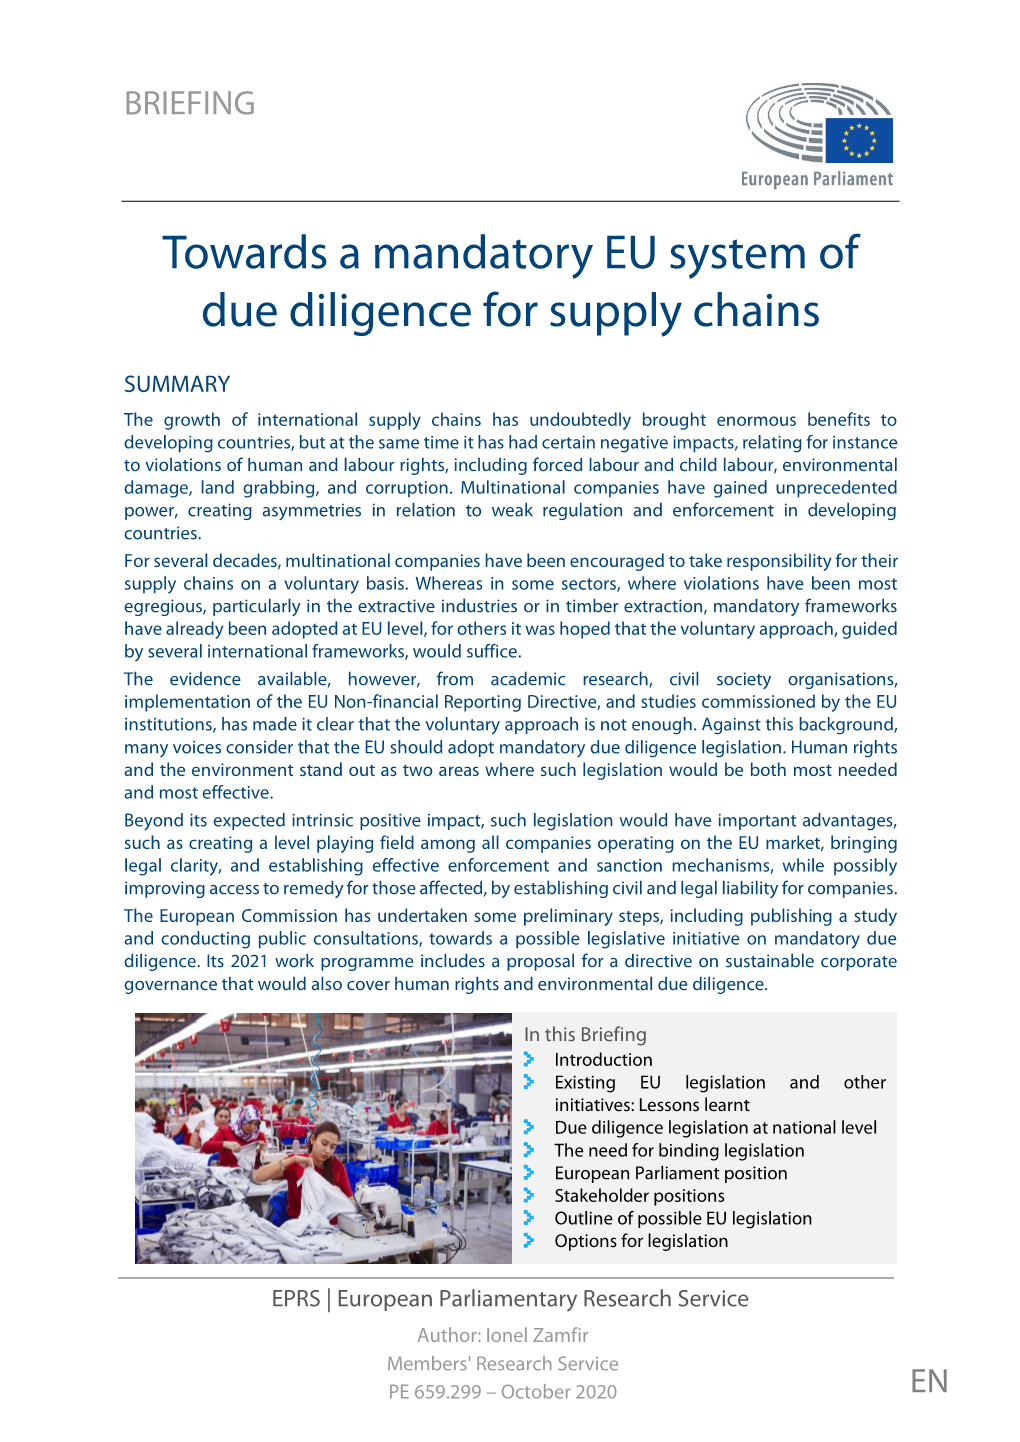 Towards a Mandatory EU System of Due Diligence for Supply Chains